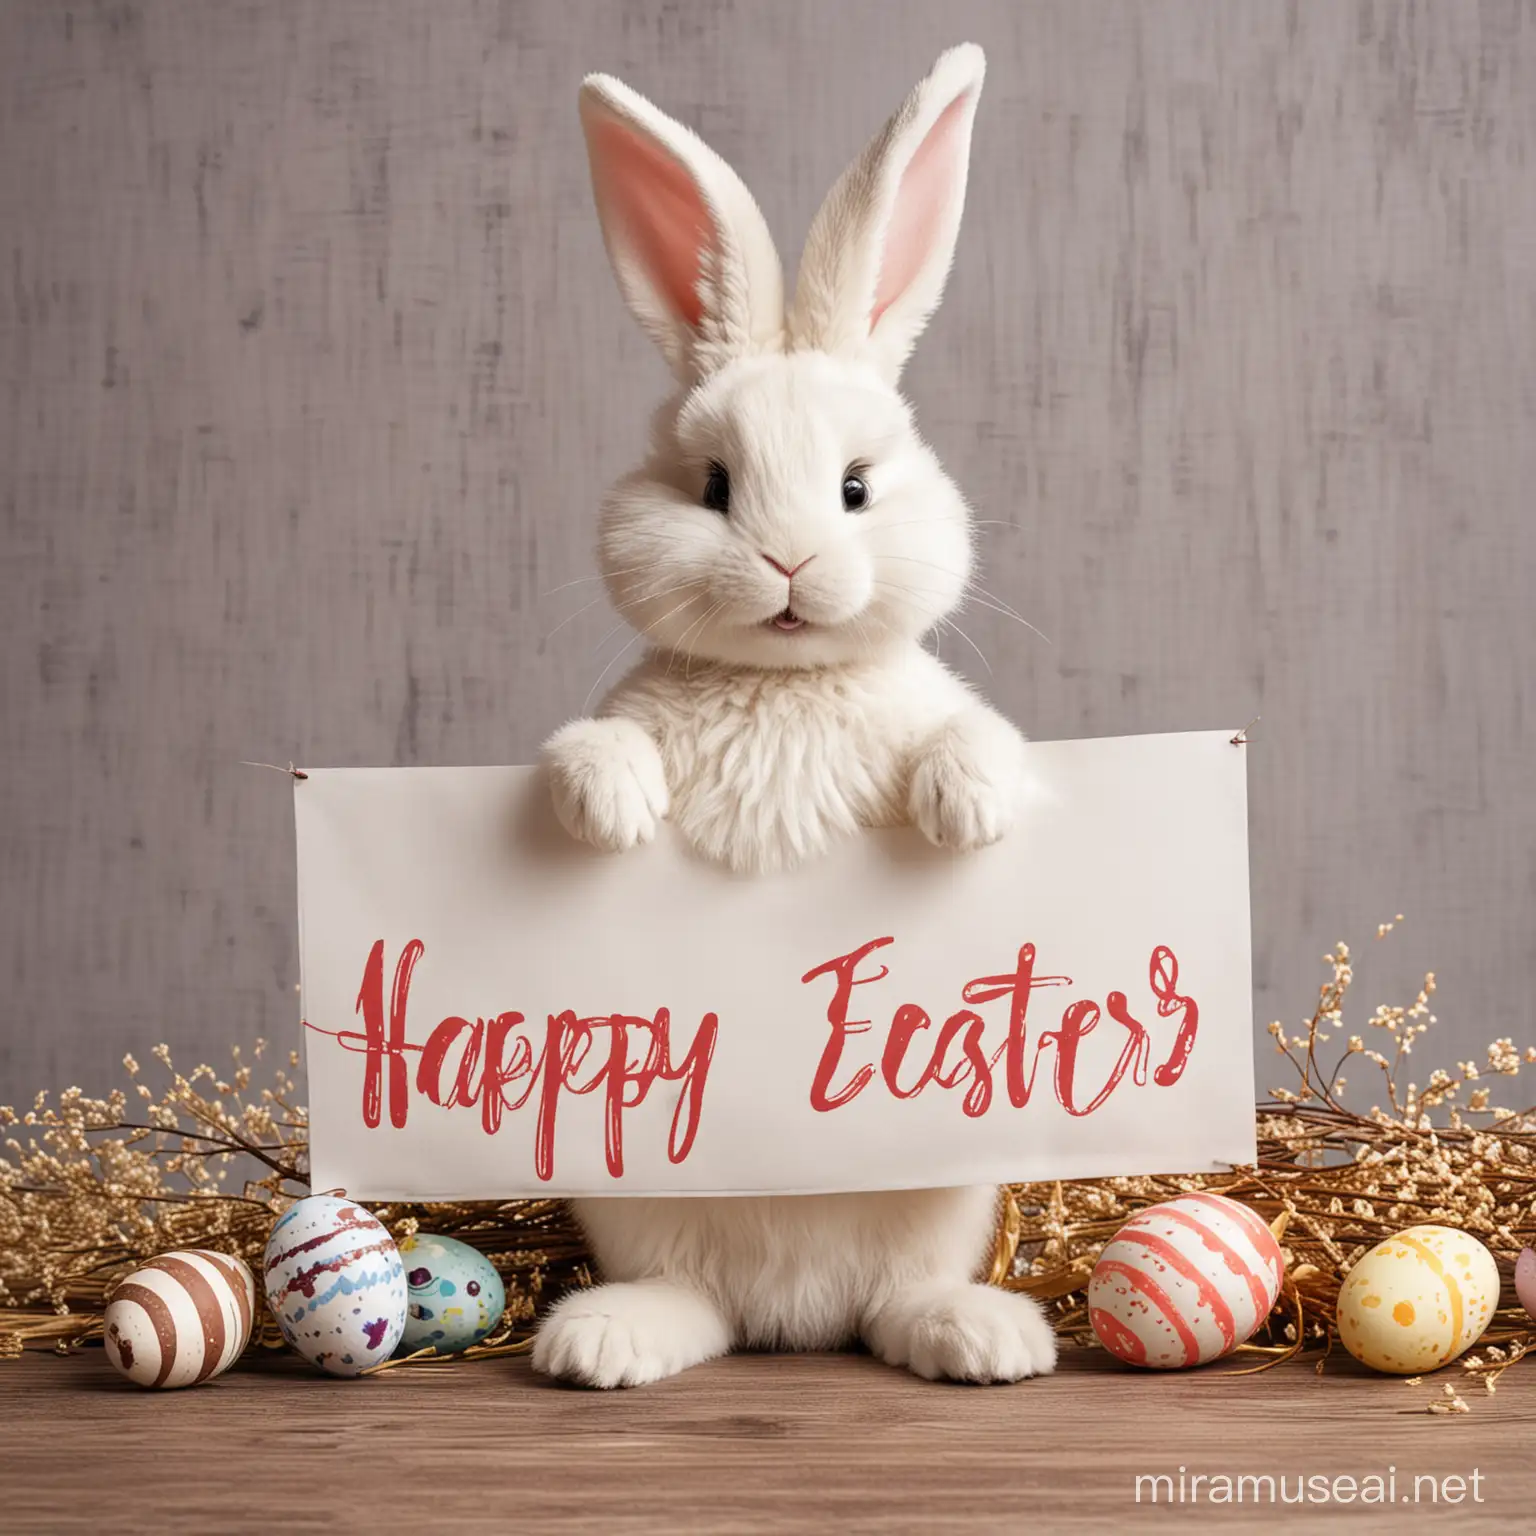 Happy easter bunny with the banner with written words ,, Happy Easter"